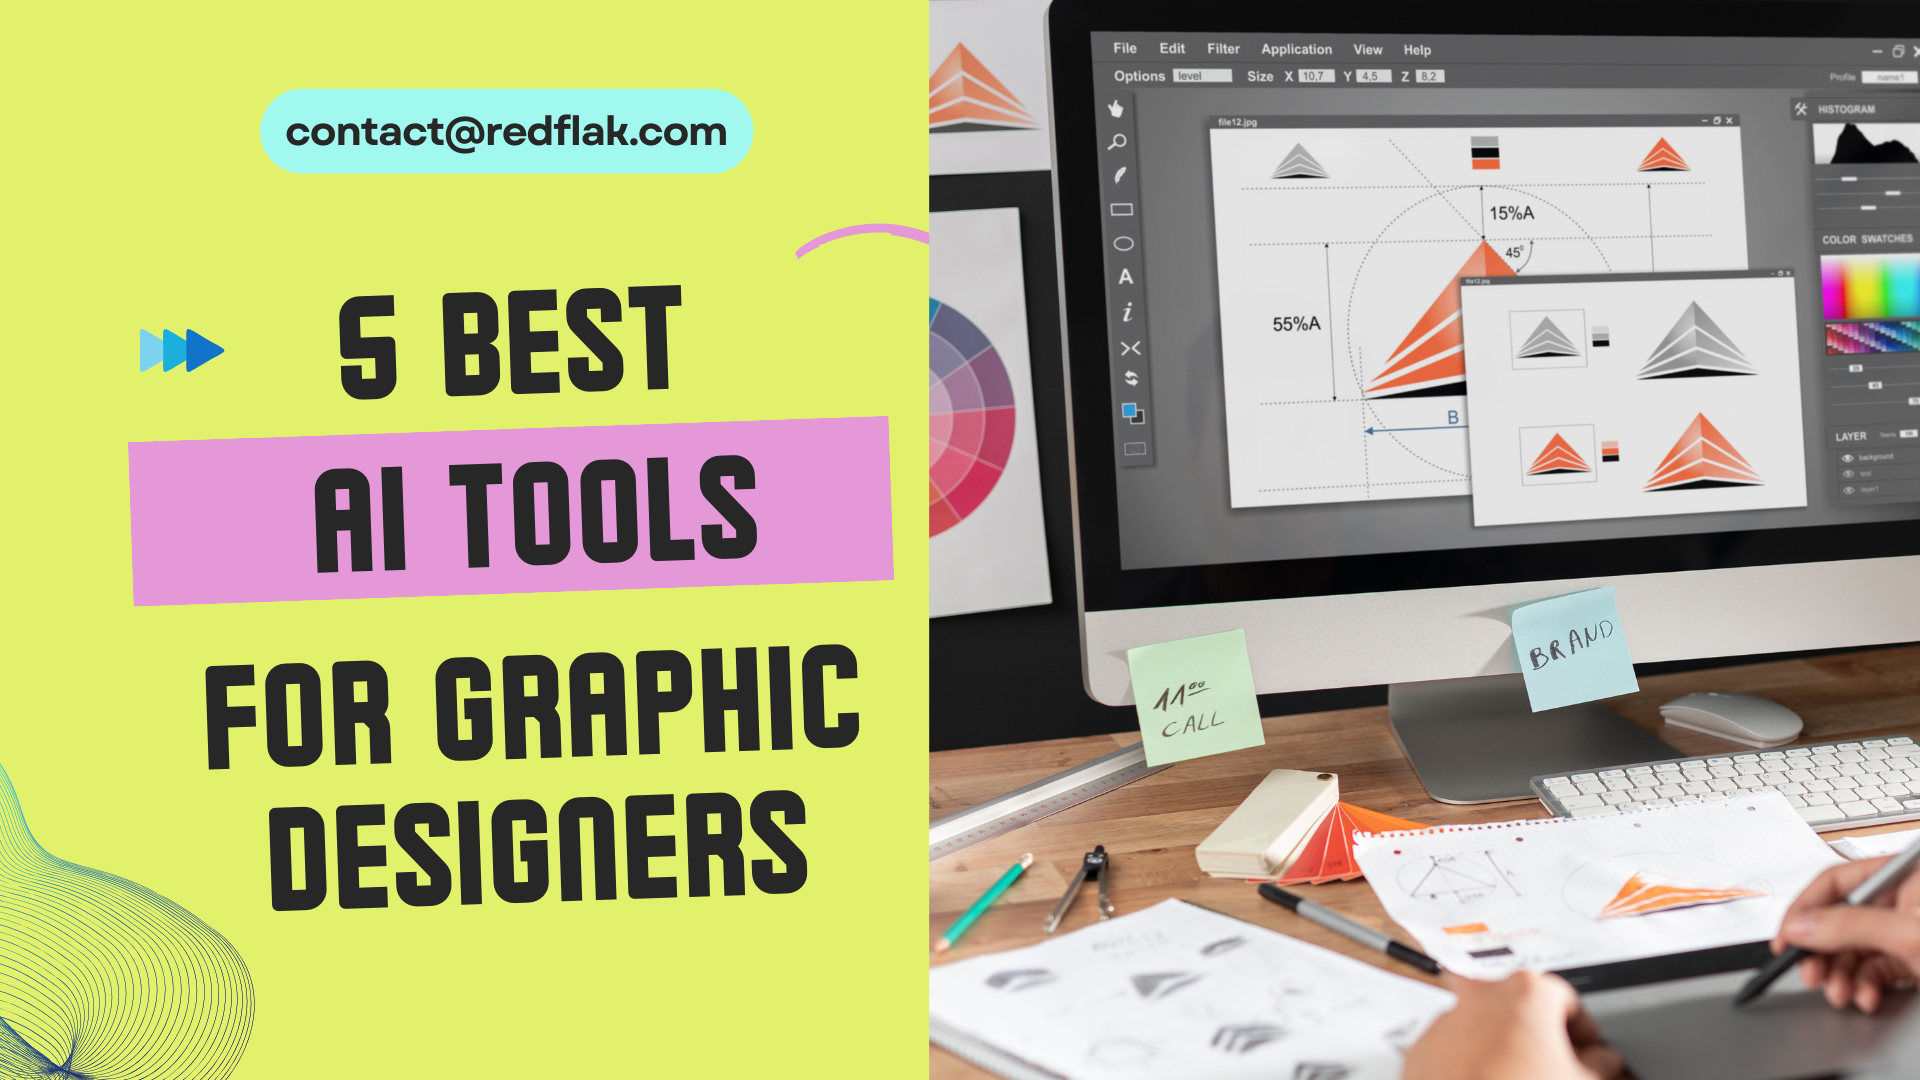 Graphic AI tools are rapidly evolving, offering exciting possibilities for designers, artists, and even marketing professionals with limited design experience.